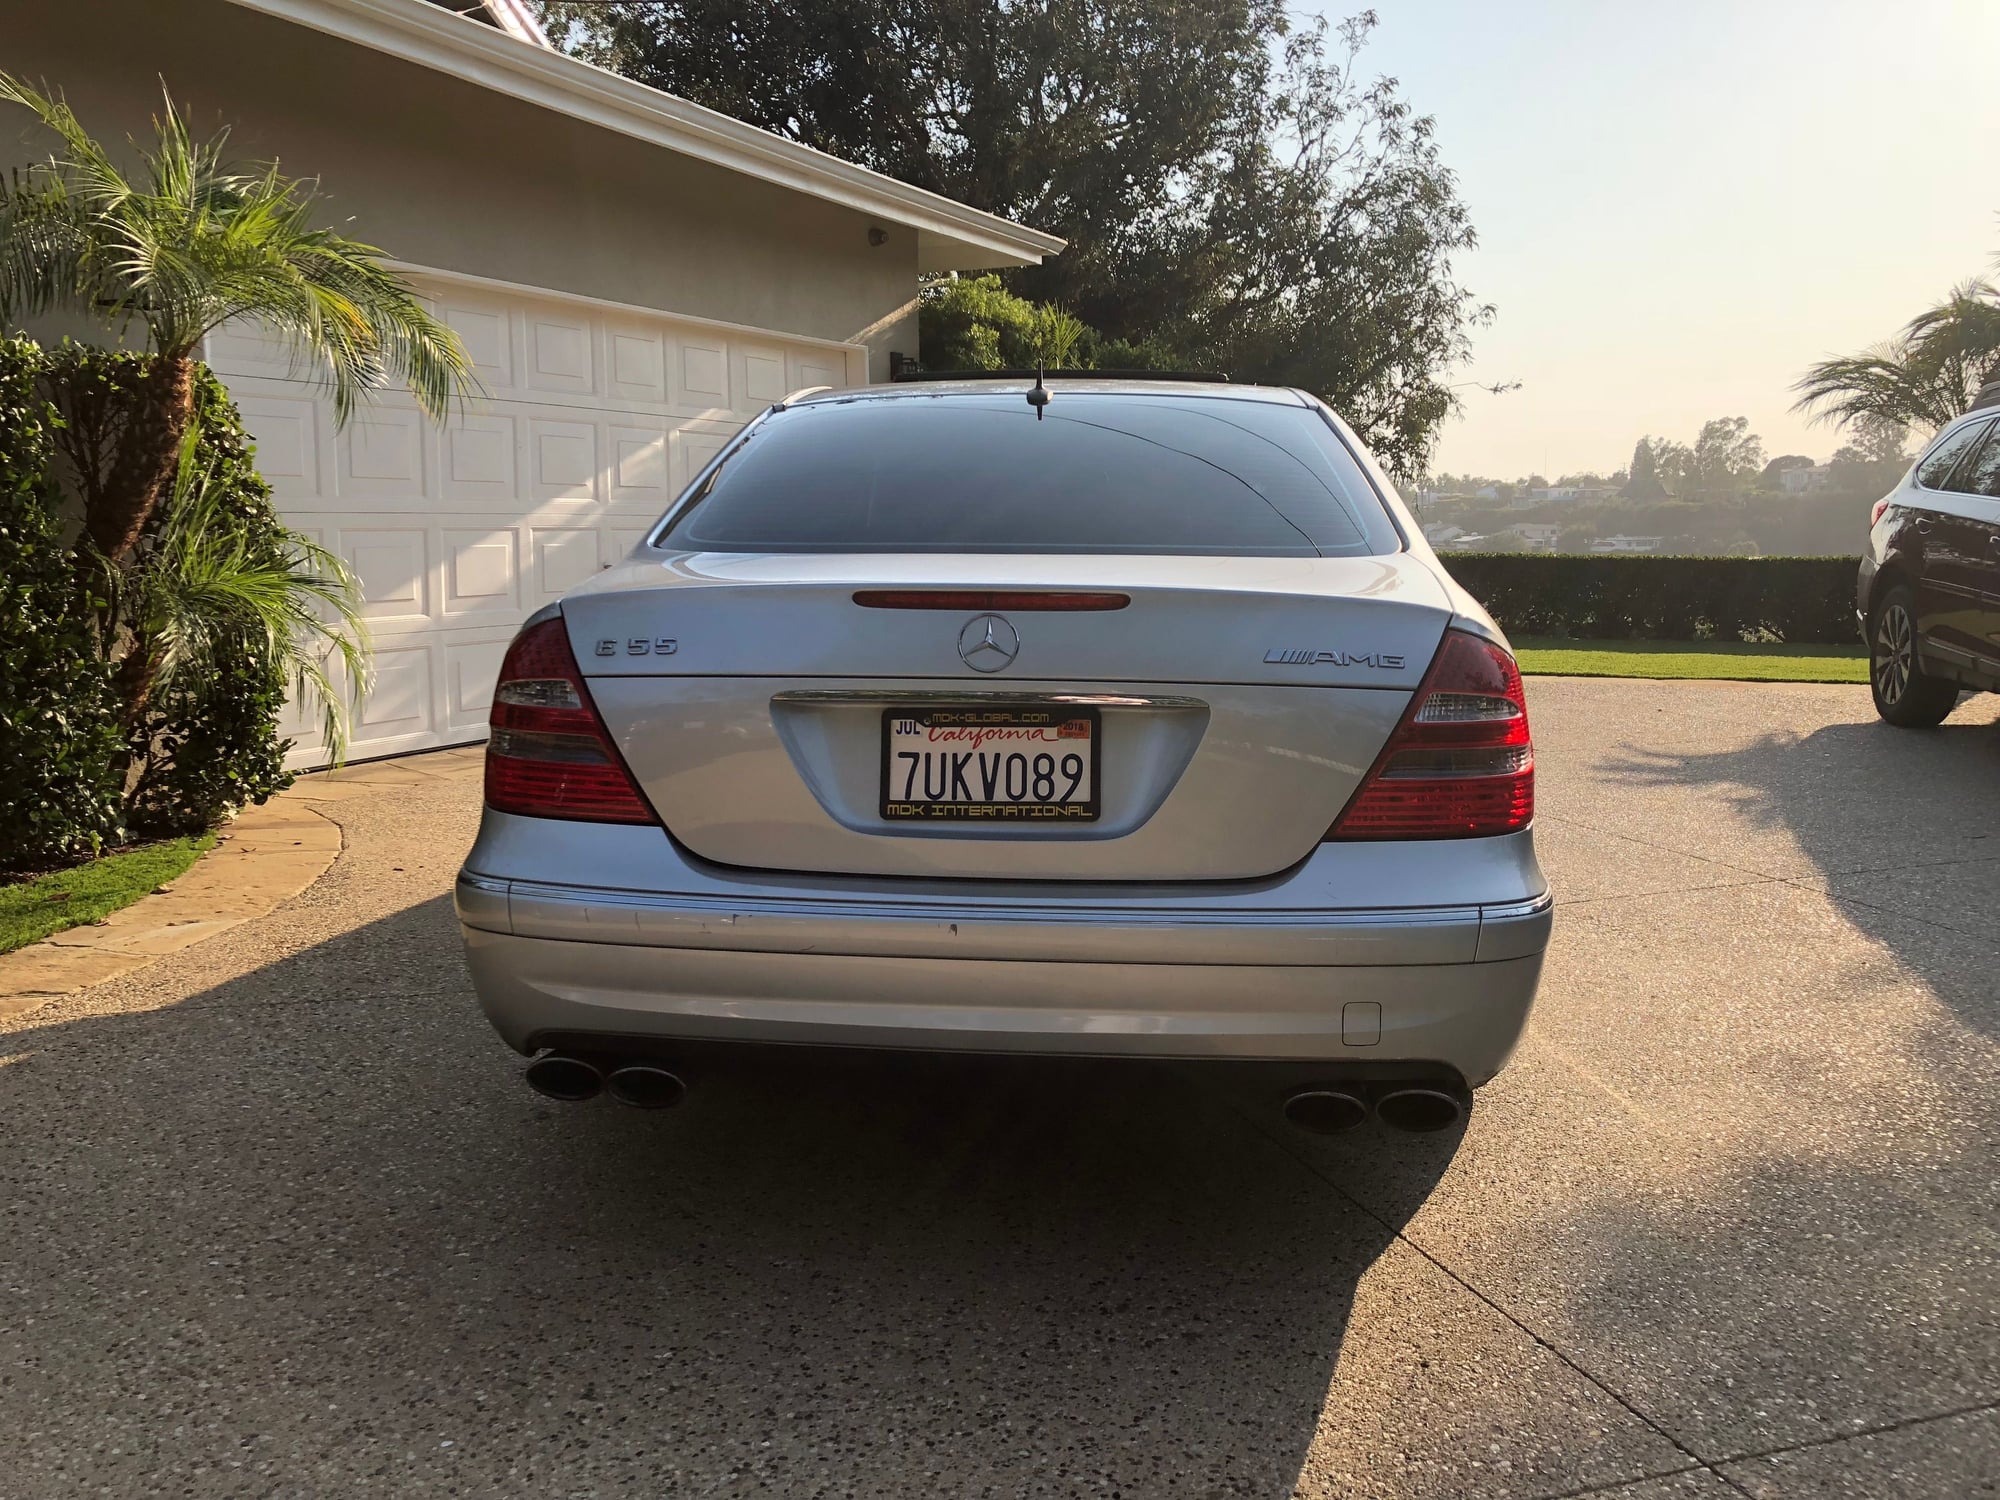 2003 Mercedes-Benz E55 AMG - This is by far THE BEST Mercedes EVER!!! - Used - VIN wdbuf76j83a291305 - 95,262 Miles - 8 cyl - 2WD - Automatic - Sedan - Silver - Los Angeles, CA 90064, United States